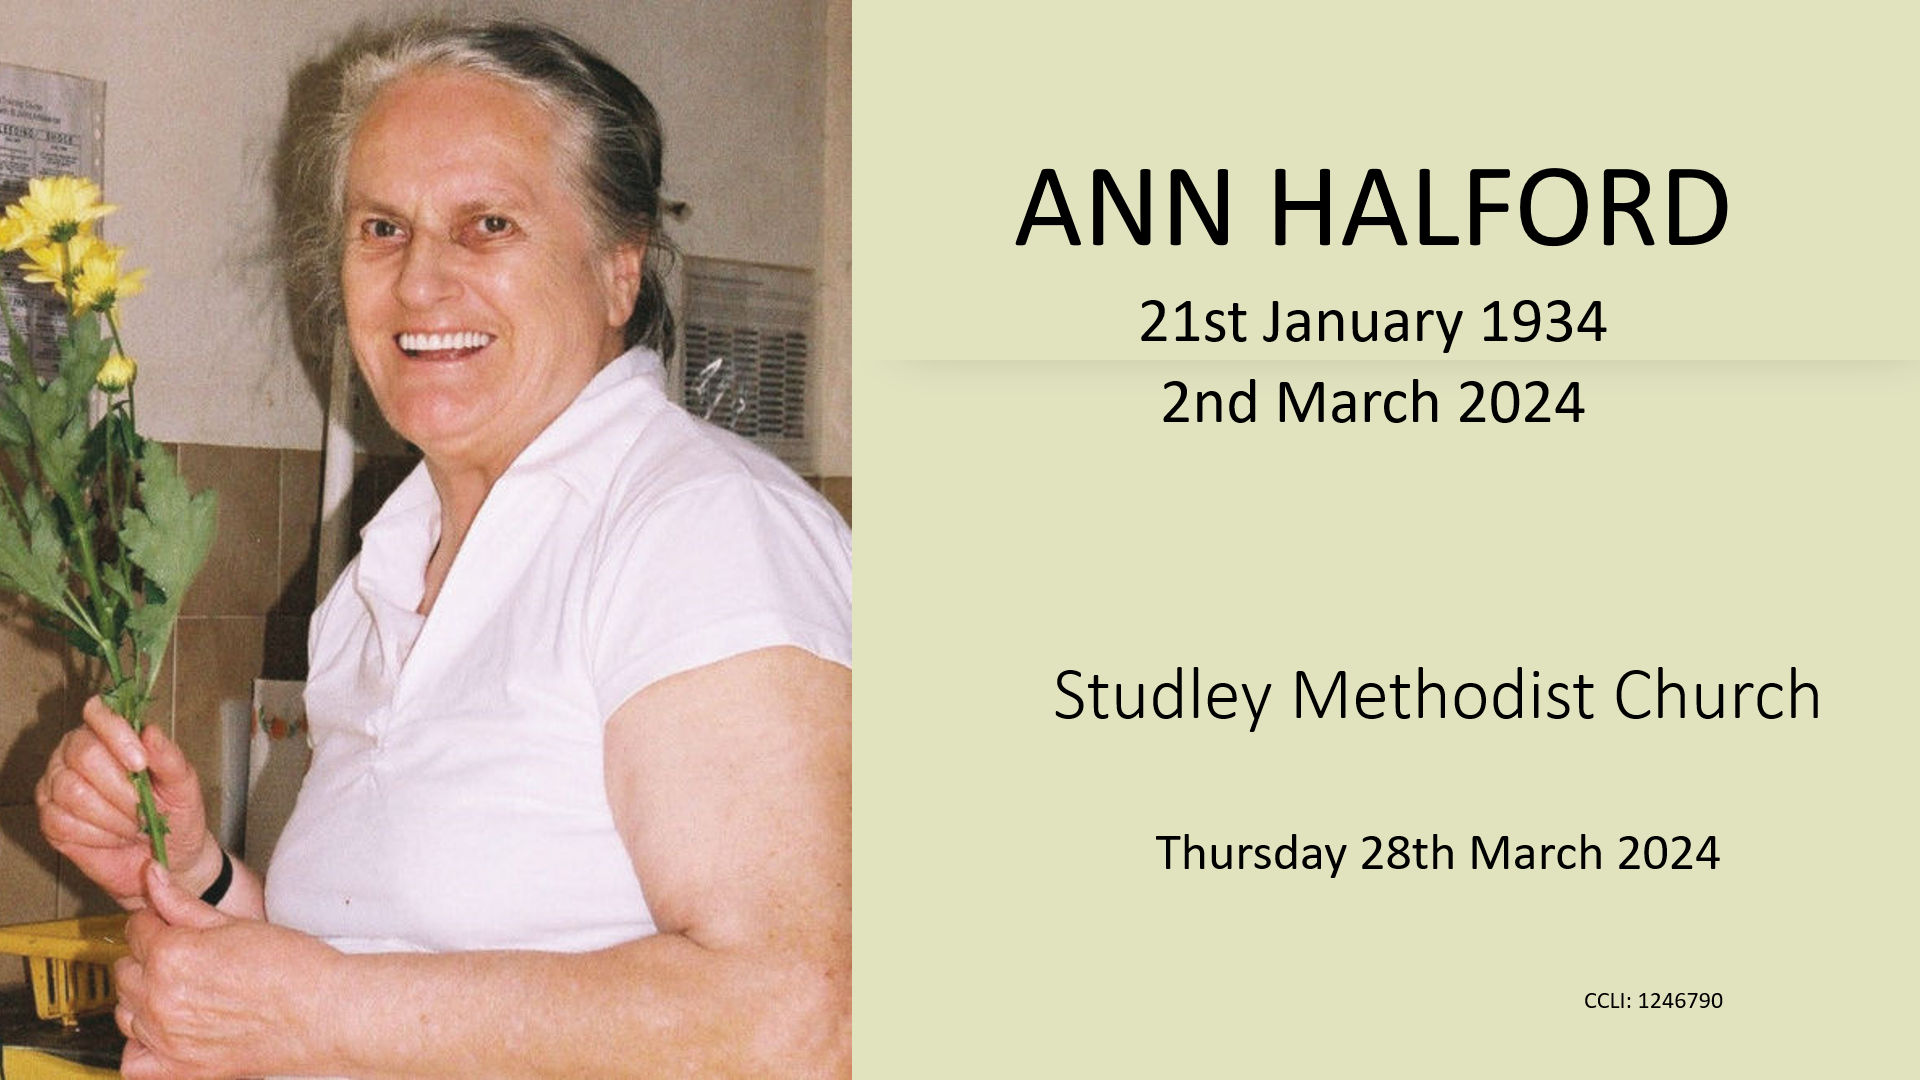 Funeral for Ann Halford